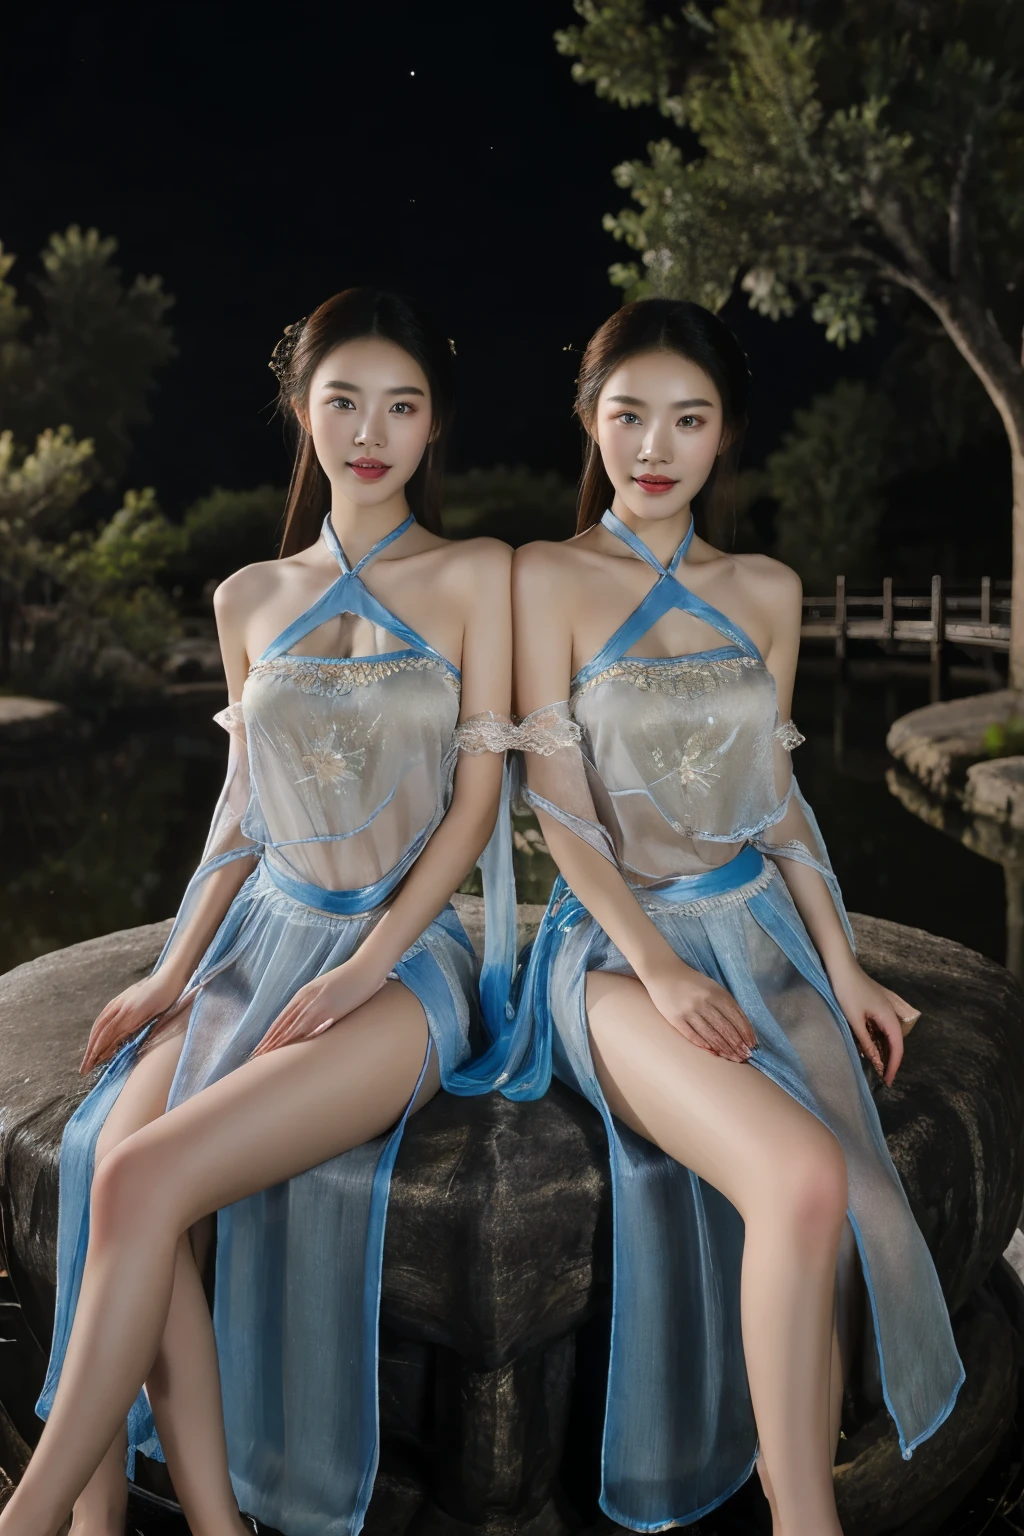 All faces and pictures must be different,((Ultra Long Exposure Photography)) high quality, highly detailed, a stunningly photorealistic closeup portrait of two beautiful Chinese women,Babyfaced, intricate detailed eyes,open shoulders,see-through,skirtlift,where two mysterious women sits by the edge of a pond, capturing a romantic atmosphere under the starry sky.